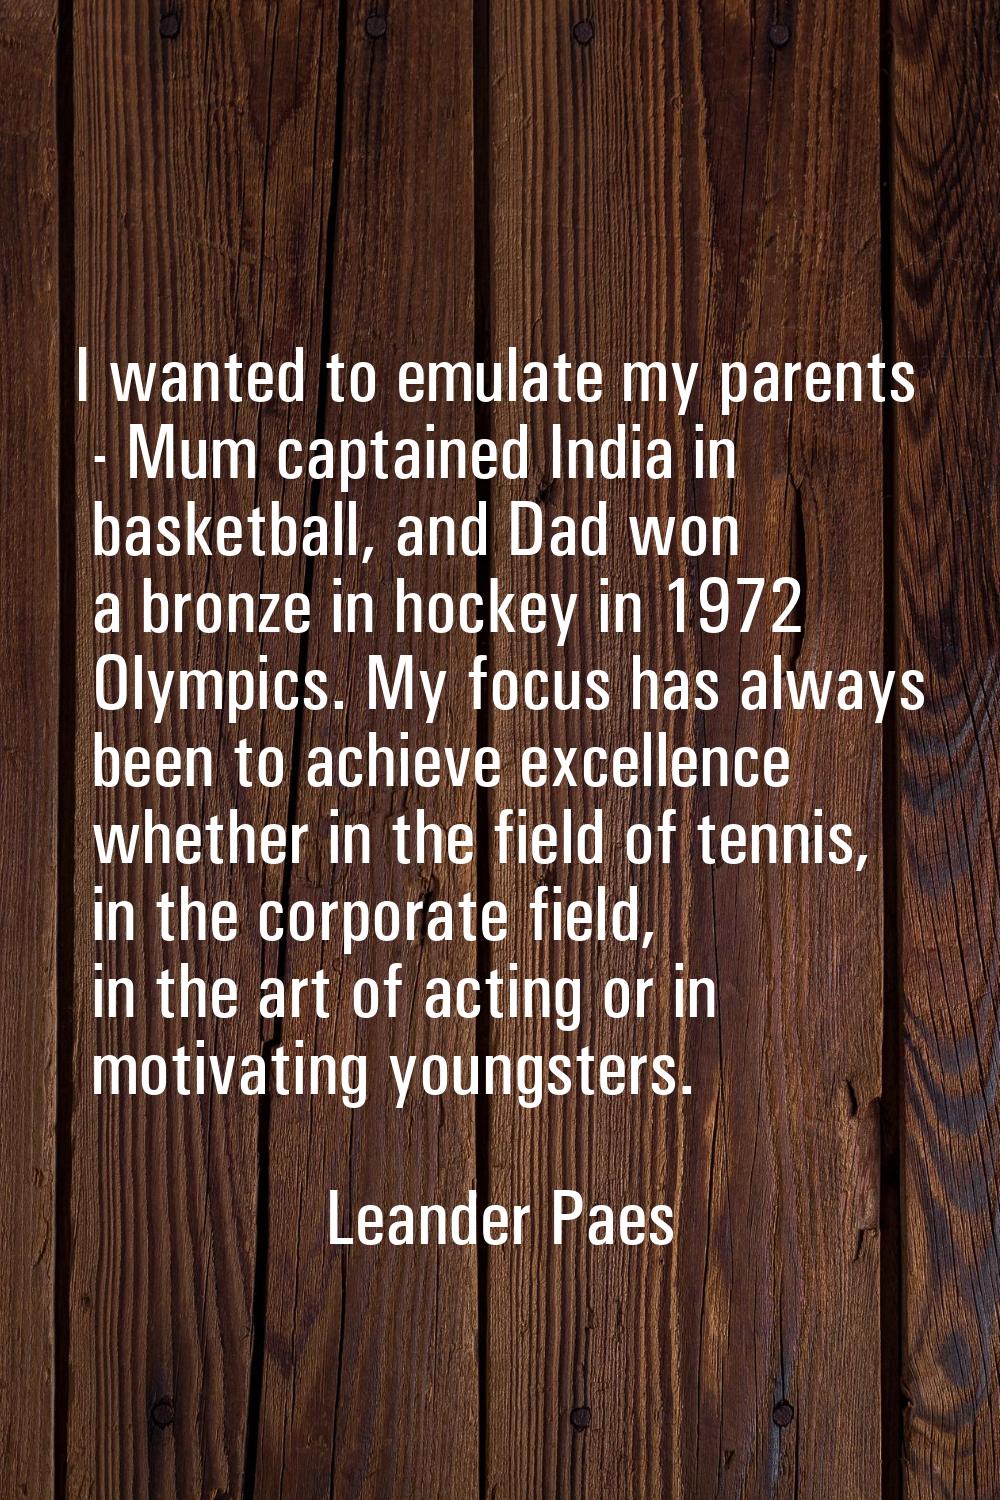 I wanted to emulate my parents - Mum captained India in basketball, and Dad won a bronze in hockey 